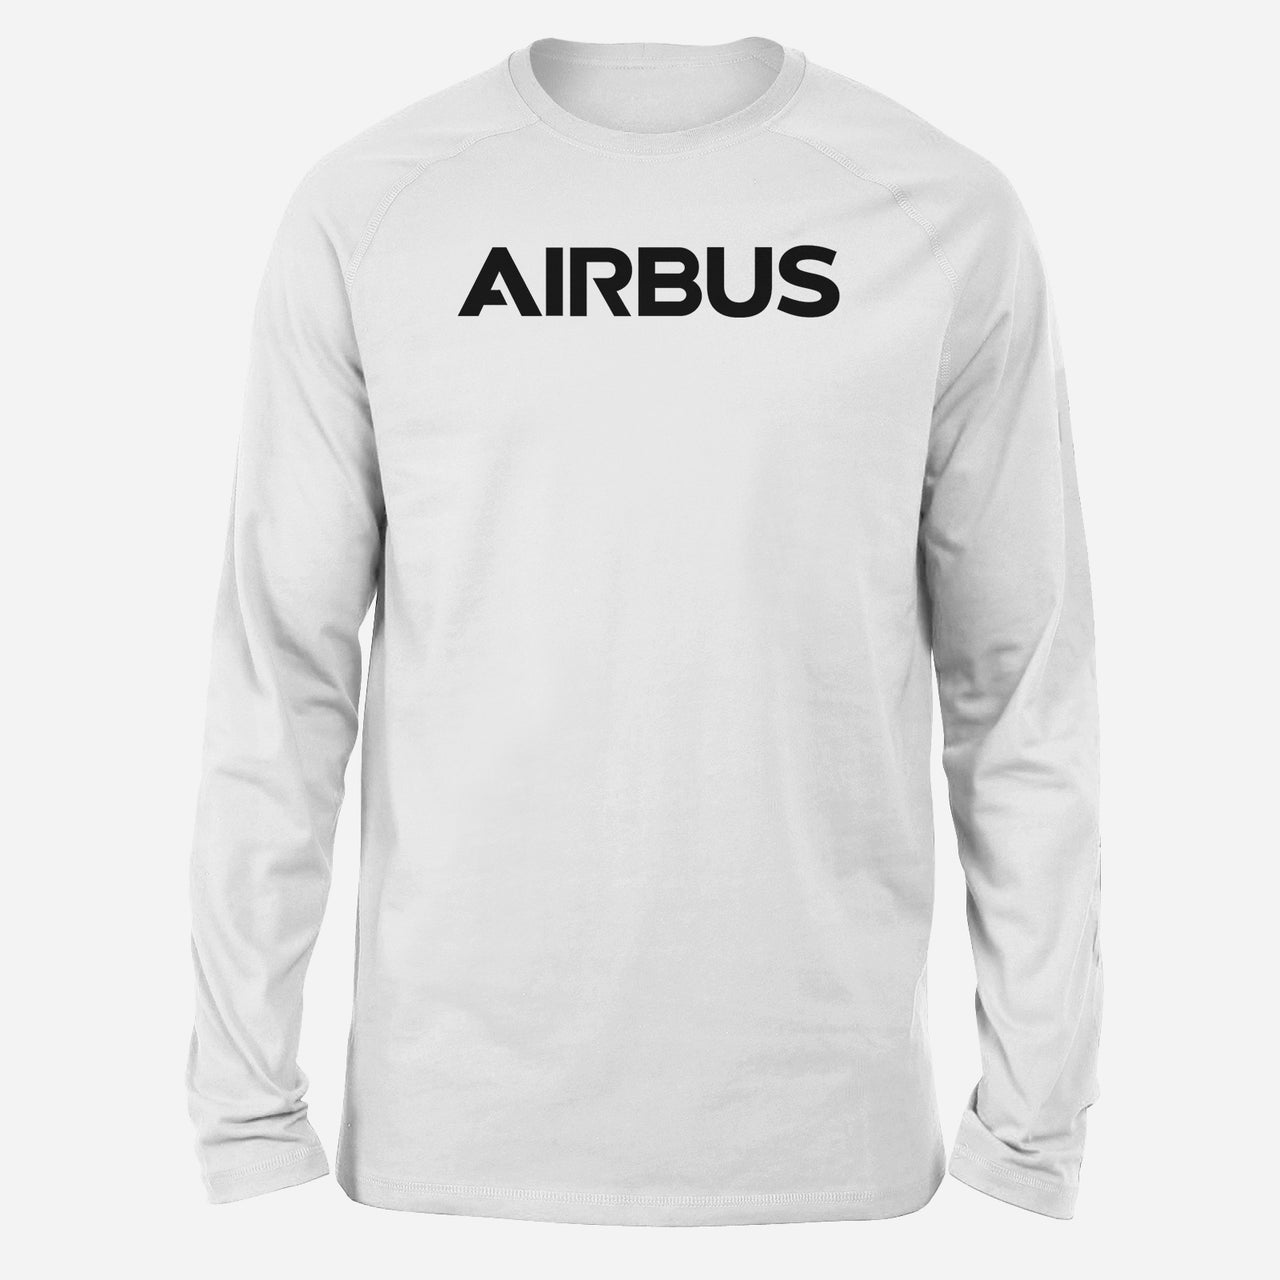 Airbus & Text Designed Long-Sleeve T-Shirts